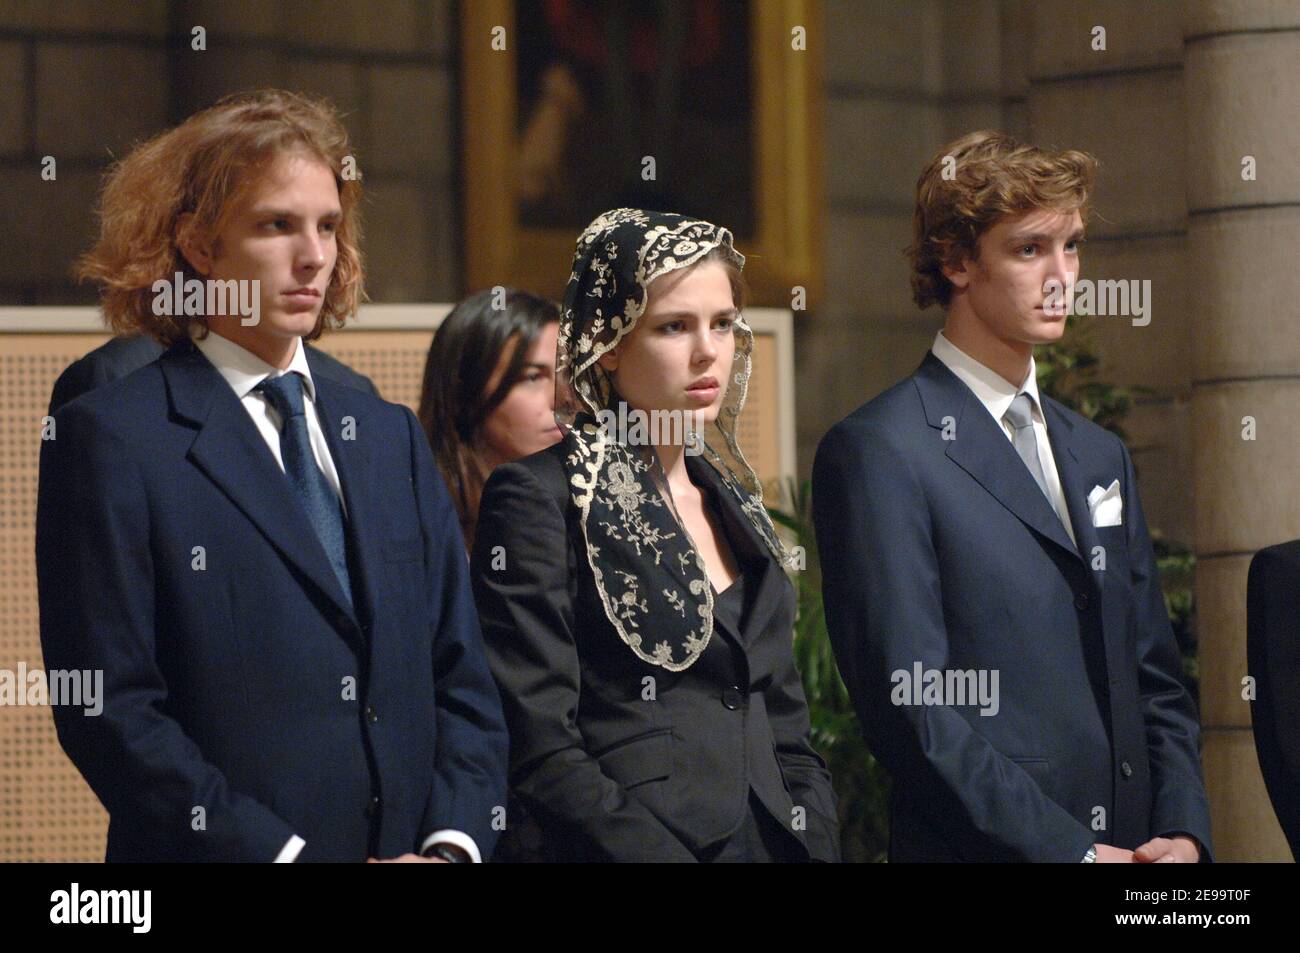 Andrea, Charlotte and Pierre Casiraghi attend the mass commemorating the first anniversary of Prince Rainier's death in Saint-Nicolas Cathedral, in Monaco on April 6, 2006. Prince Rainier III died on April 6, 2005 after a serious illness, and his only son Prince Albert, succeeded him. Photo by Pool/ABACAPRESS.COM Stock Photo